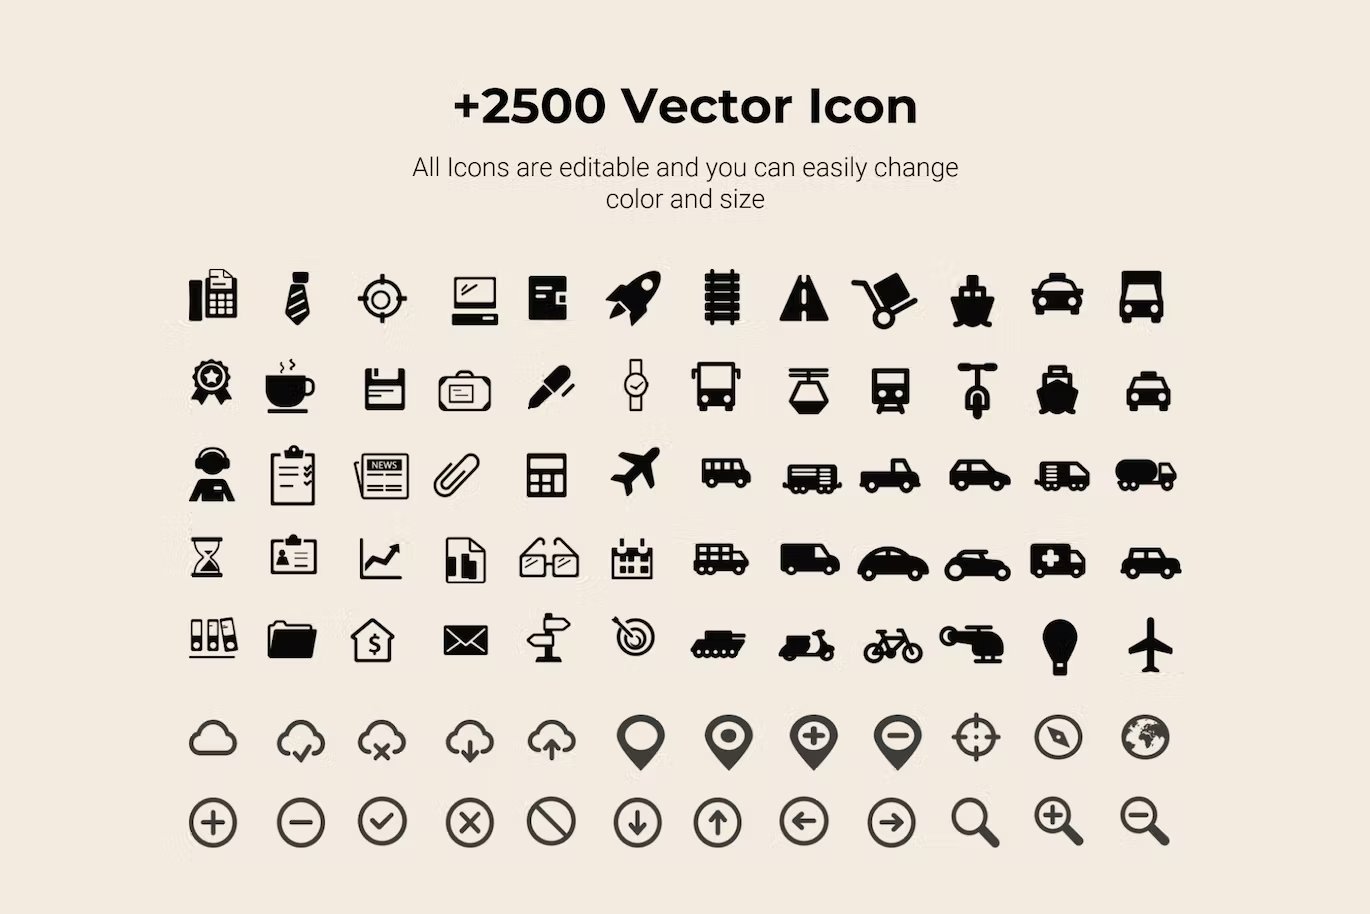 Icons for the presentation pack.